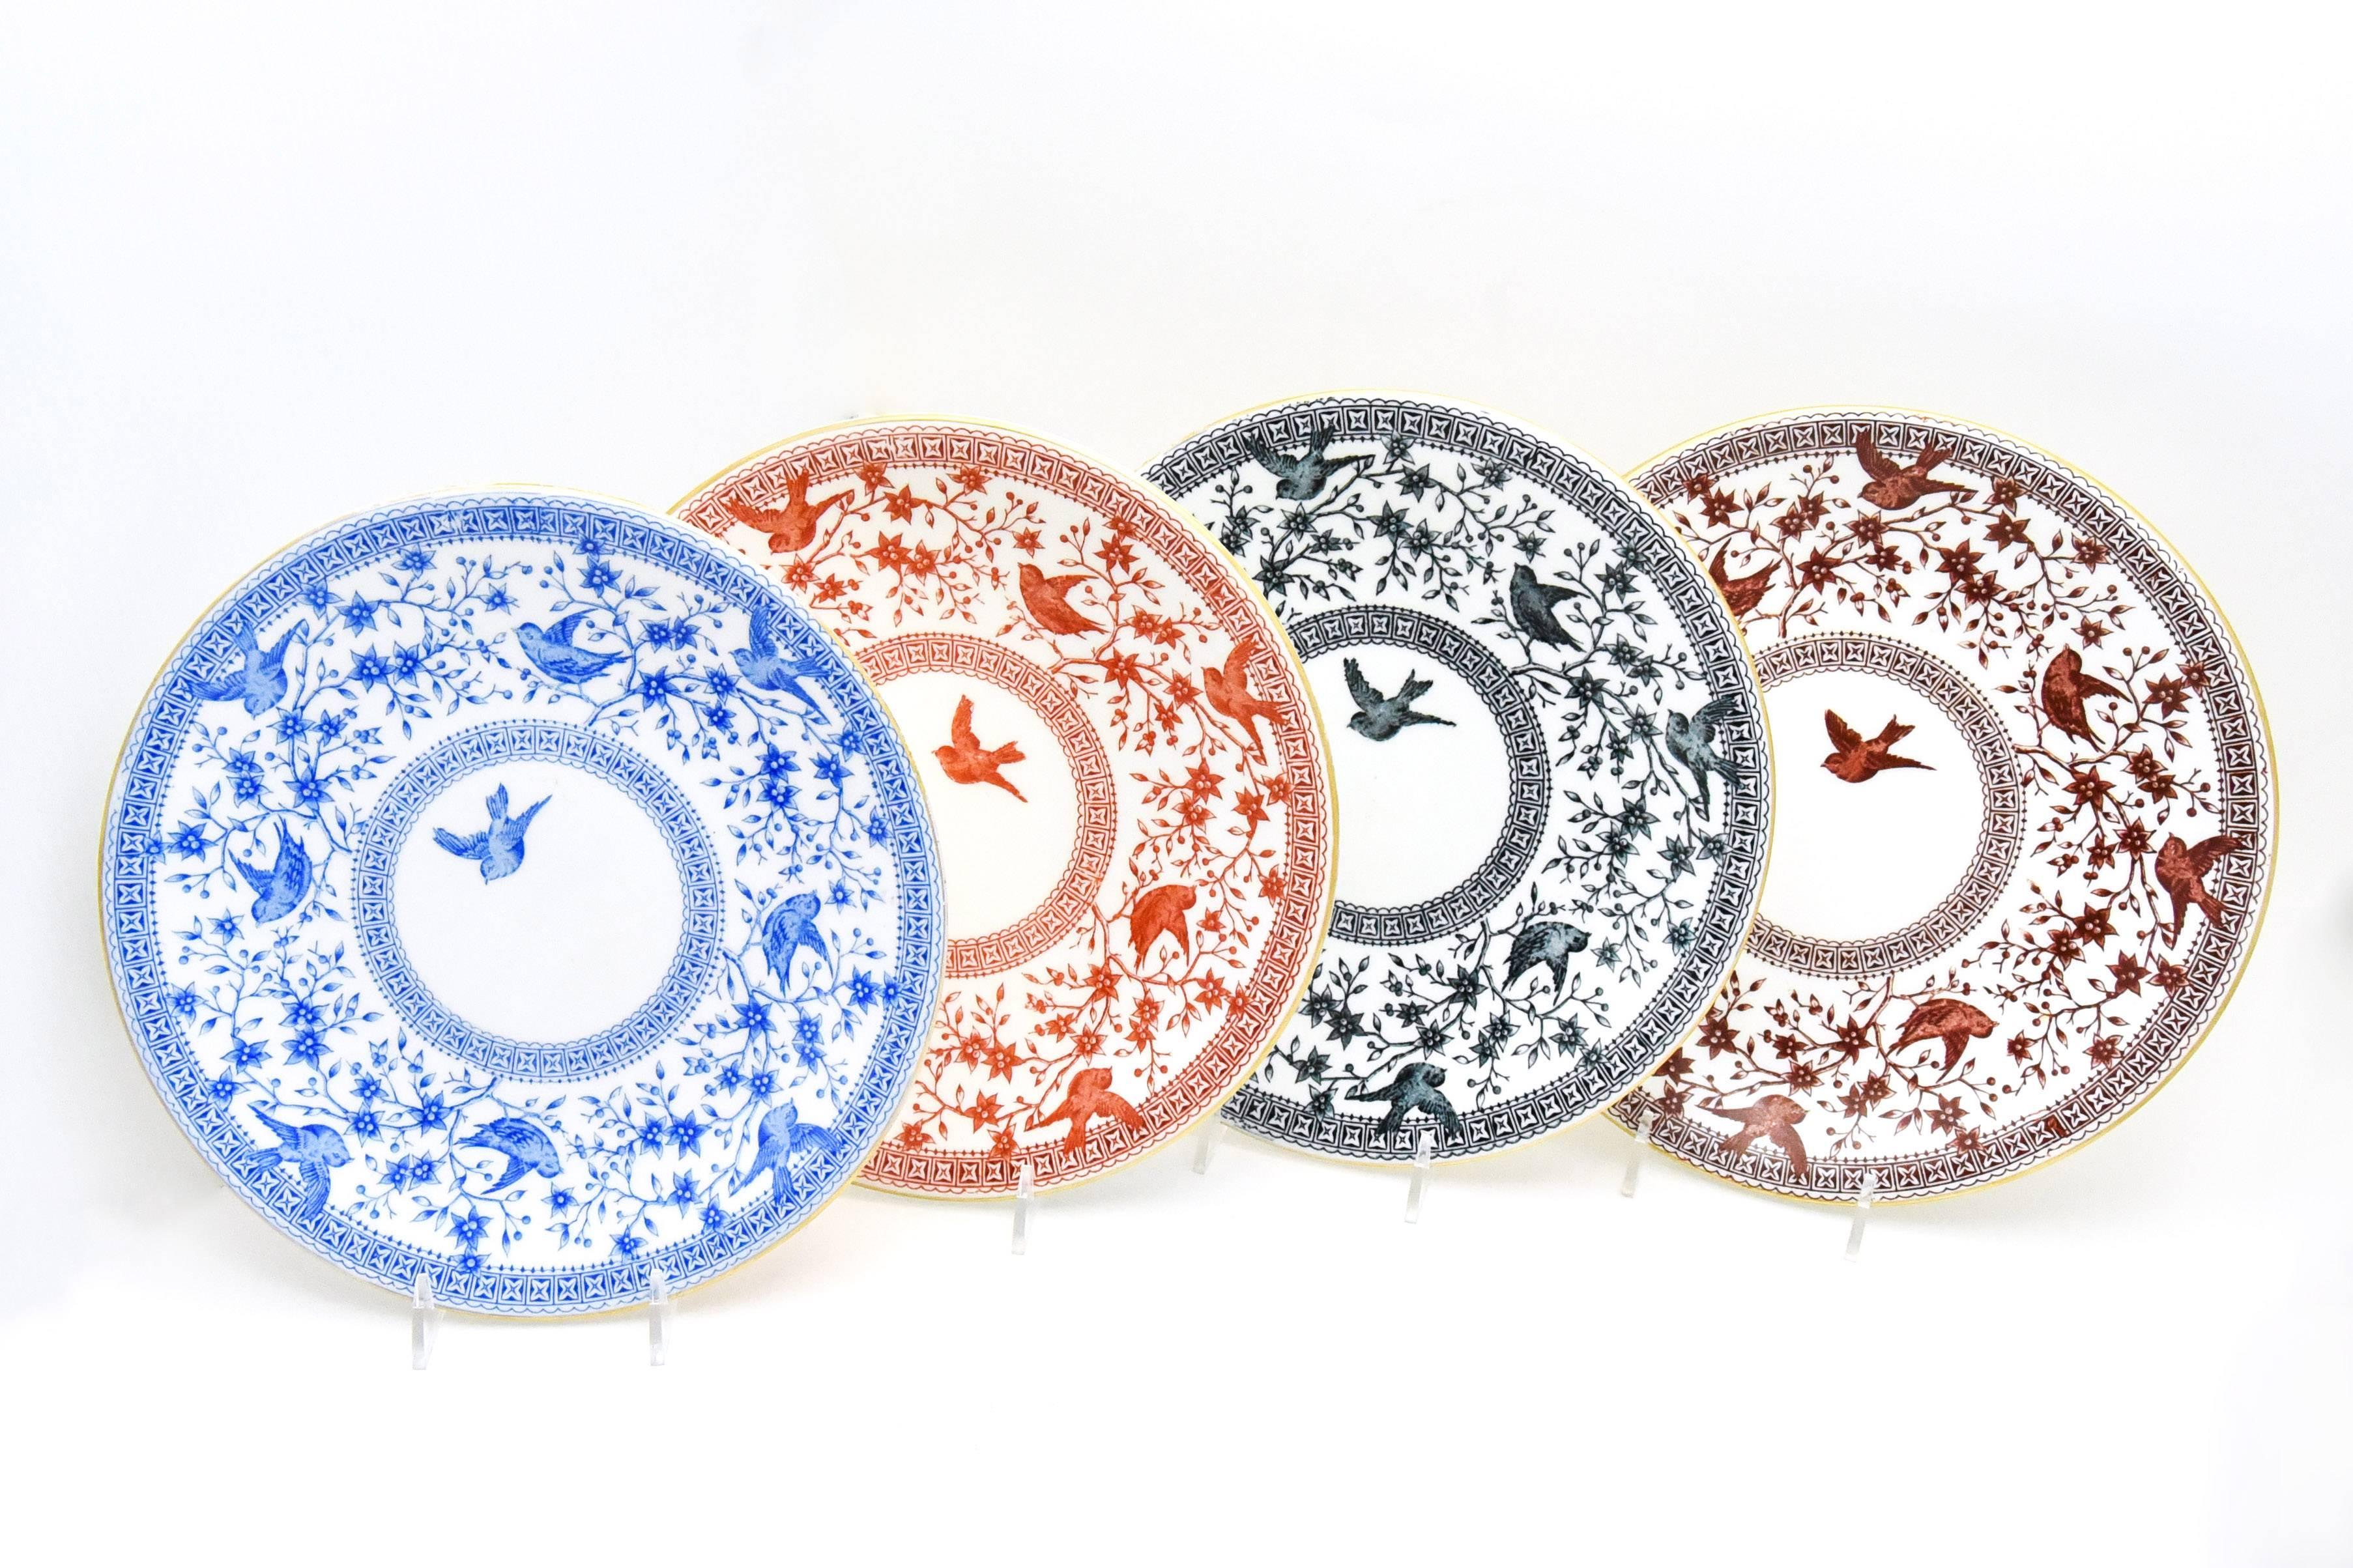 This is an unusual set of 12 19th century. Derby dessert/luncheon plates with birds in flight in four colors in a Classic aesthetic movement pattern. There three each, of the four earth-tone colors pictured: Imari Orange, blue, black and